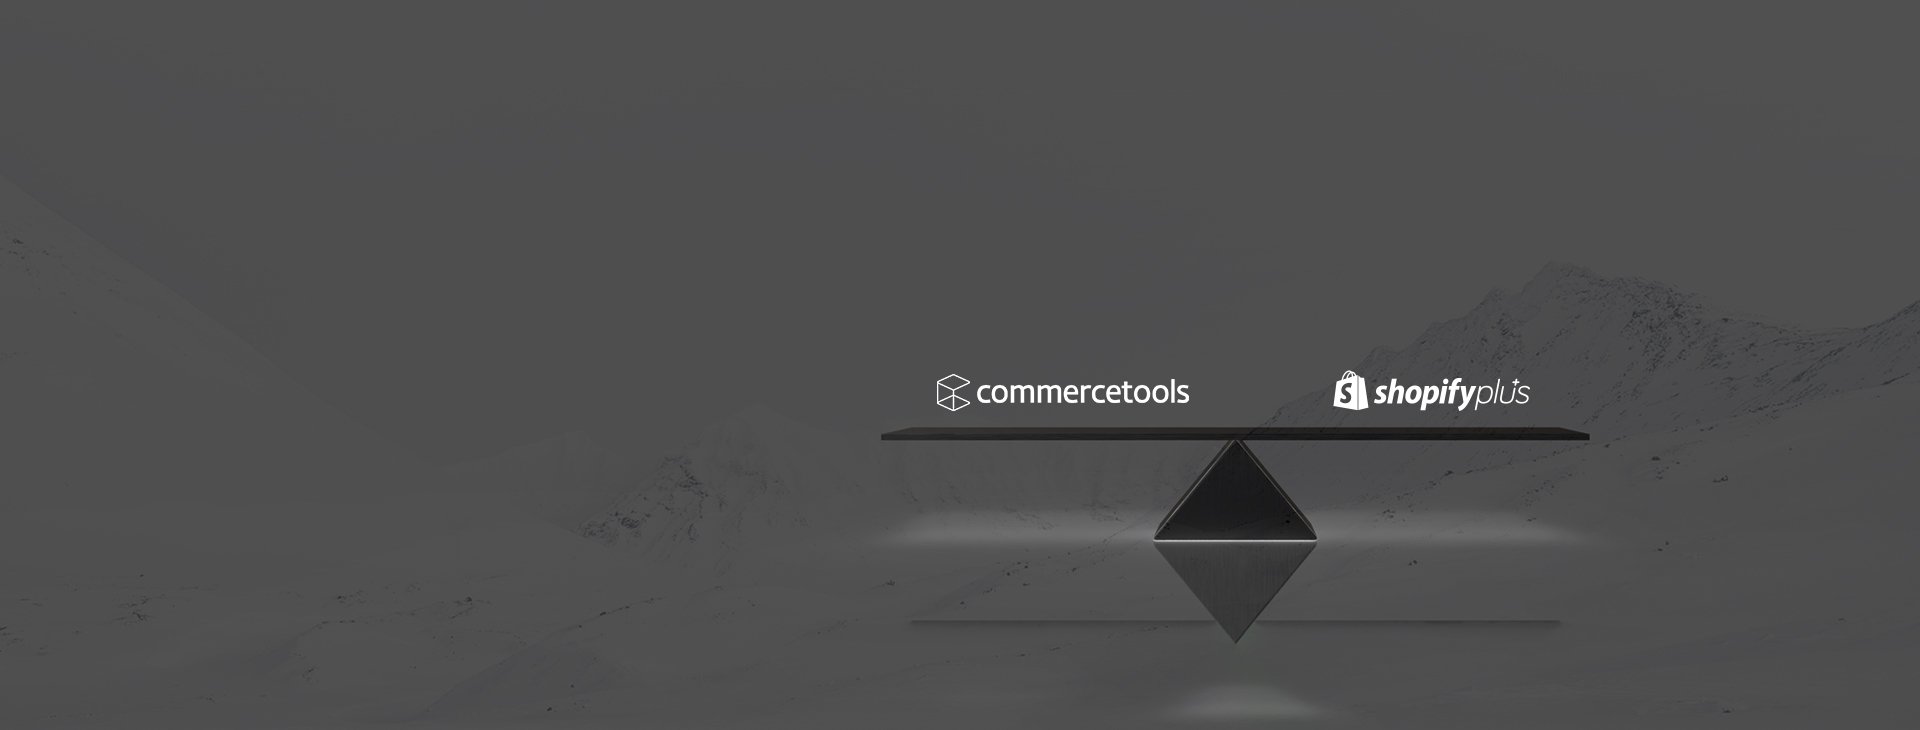 Abstract image showing commercetools and Shopify Plus logos